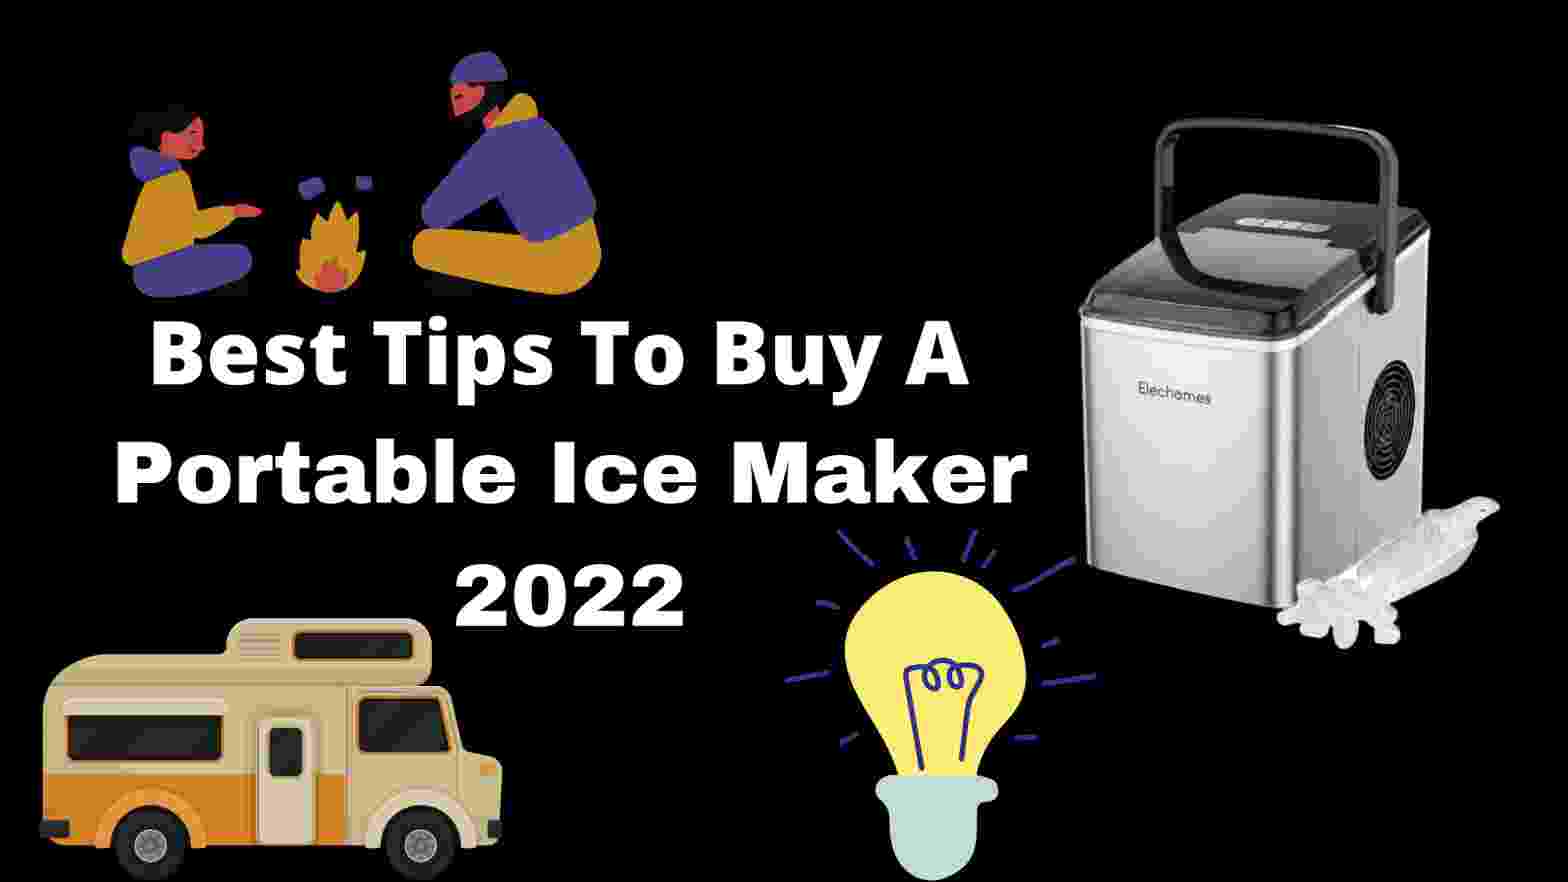 Best tips to buy a portable ice maker